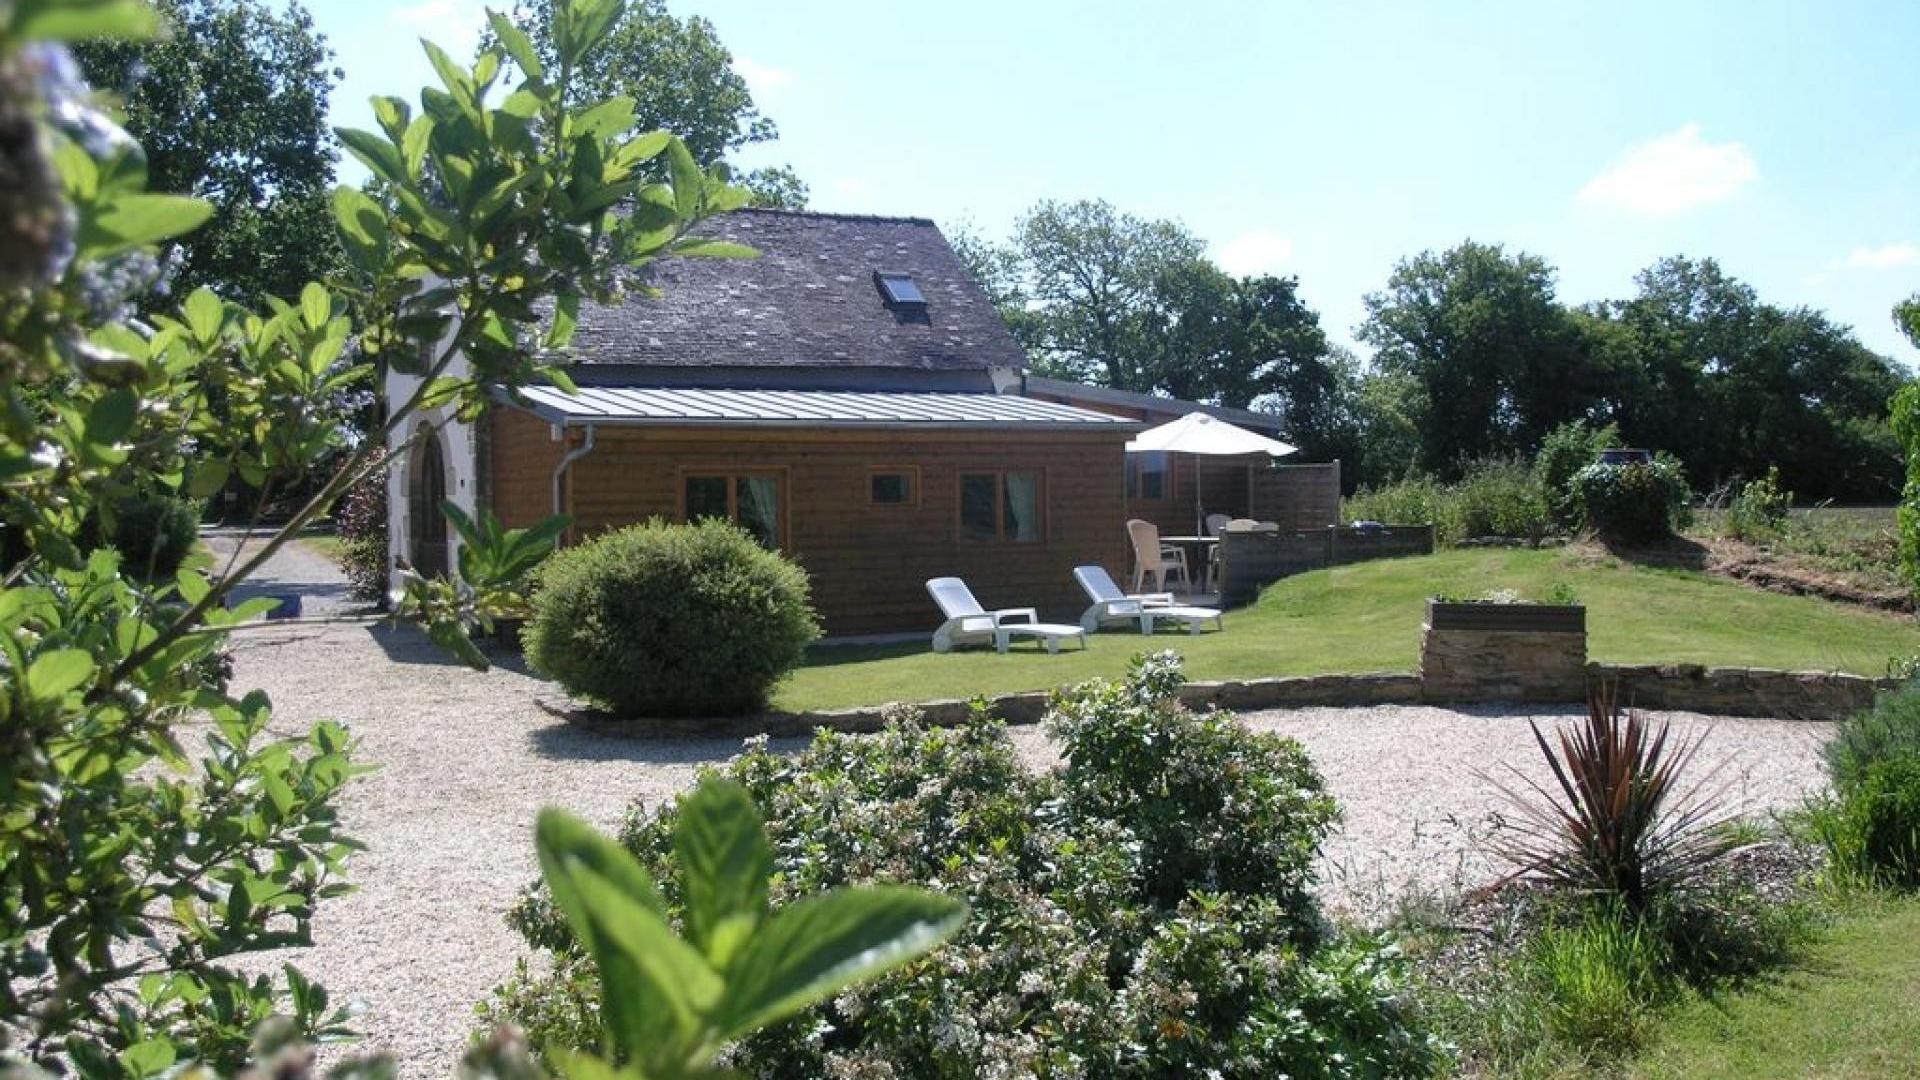 detached child friendly holiday cottage in Brittany - JACH